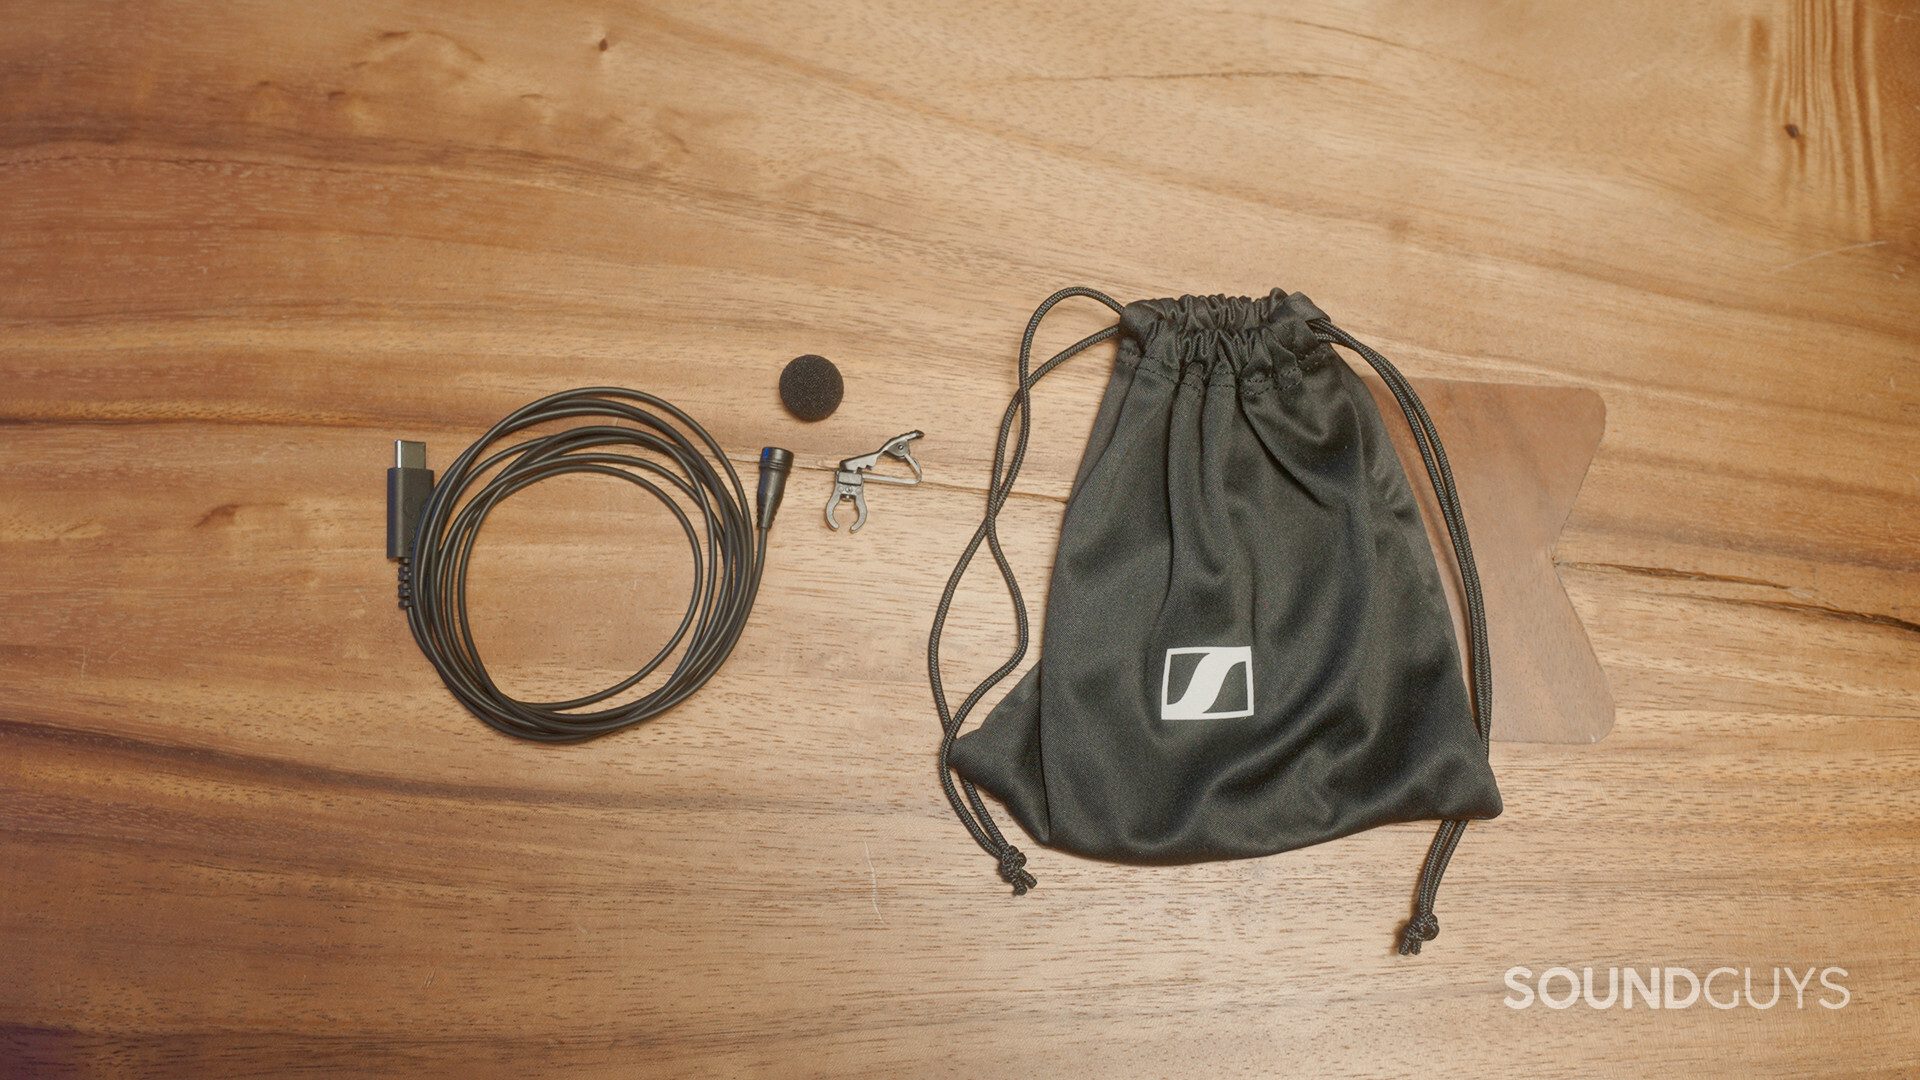 The Sennheiser XS Lav USB-C and its accessories: foam windscreen, microphone clip, and carrying pouch.